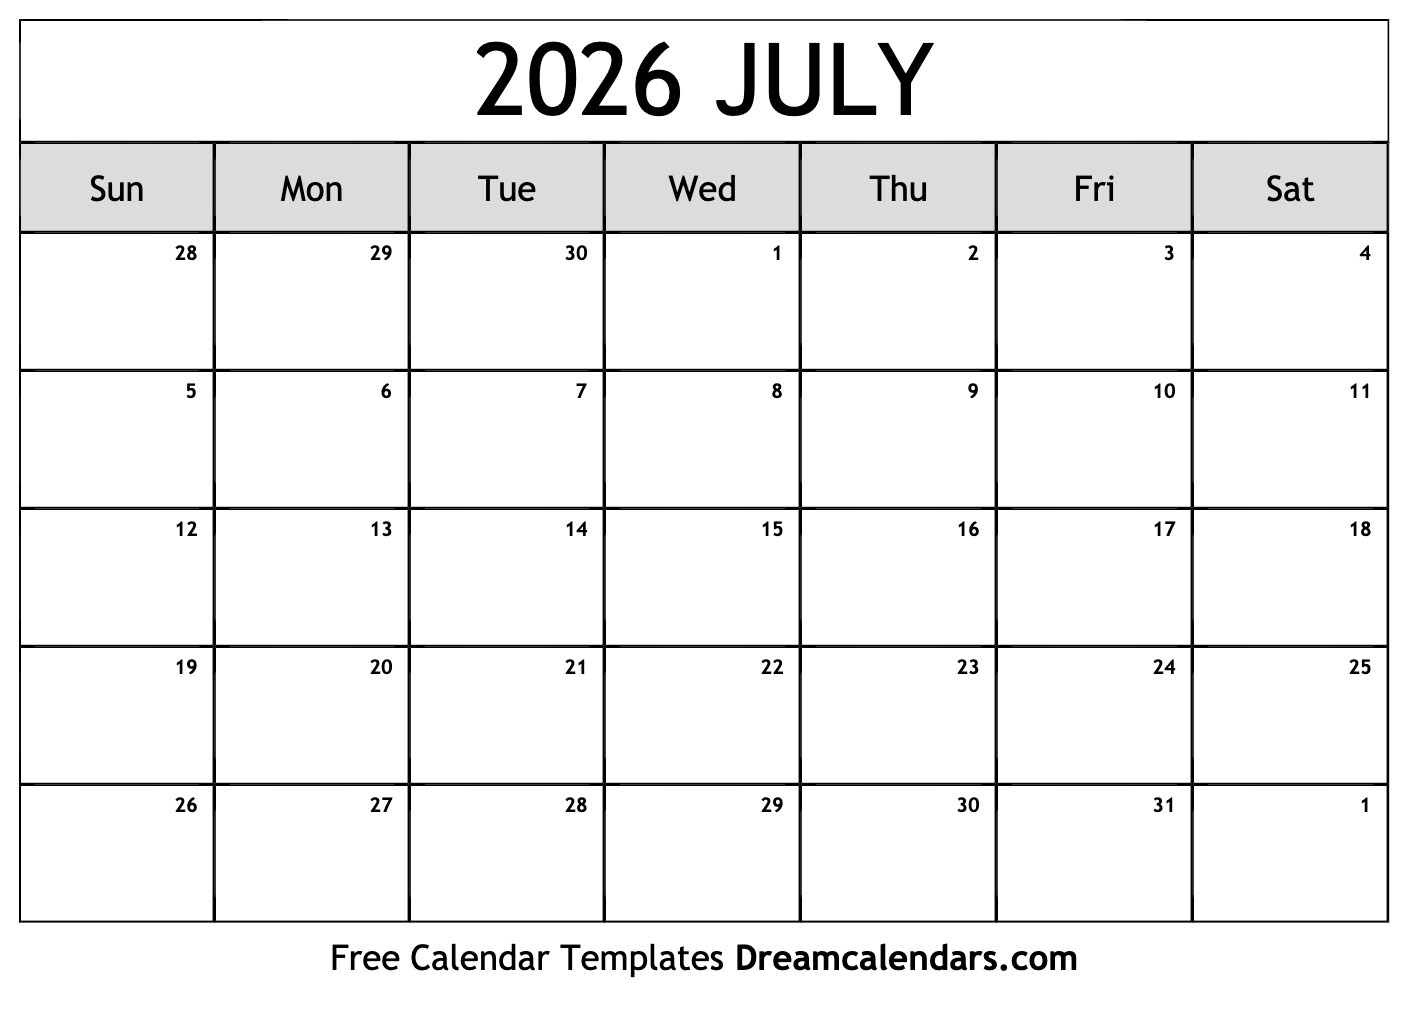 July 2026 Calendar - Free Printable With Holidays And Observances pertaining to Calendar For July 2026